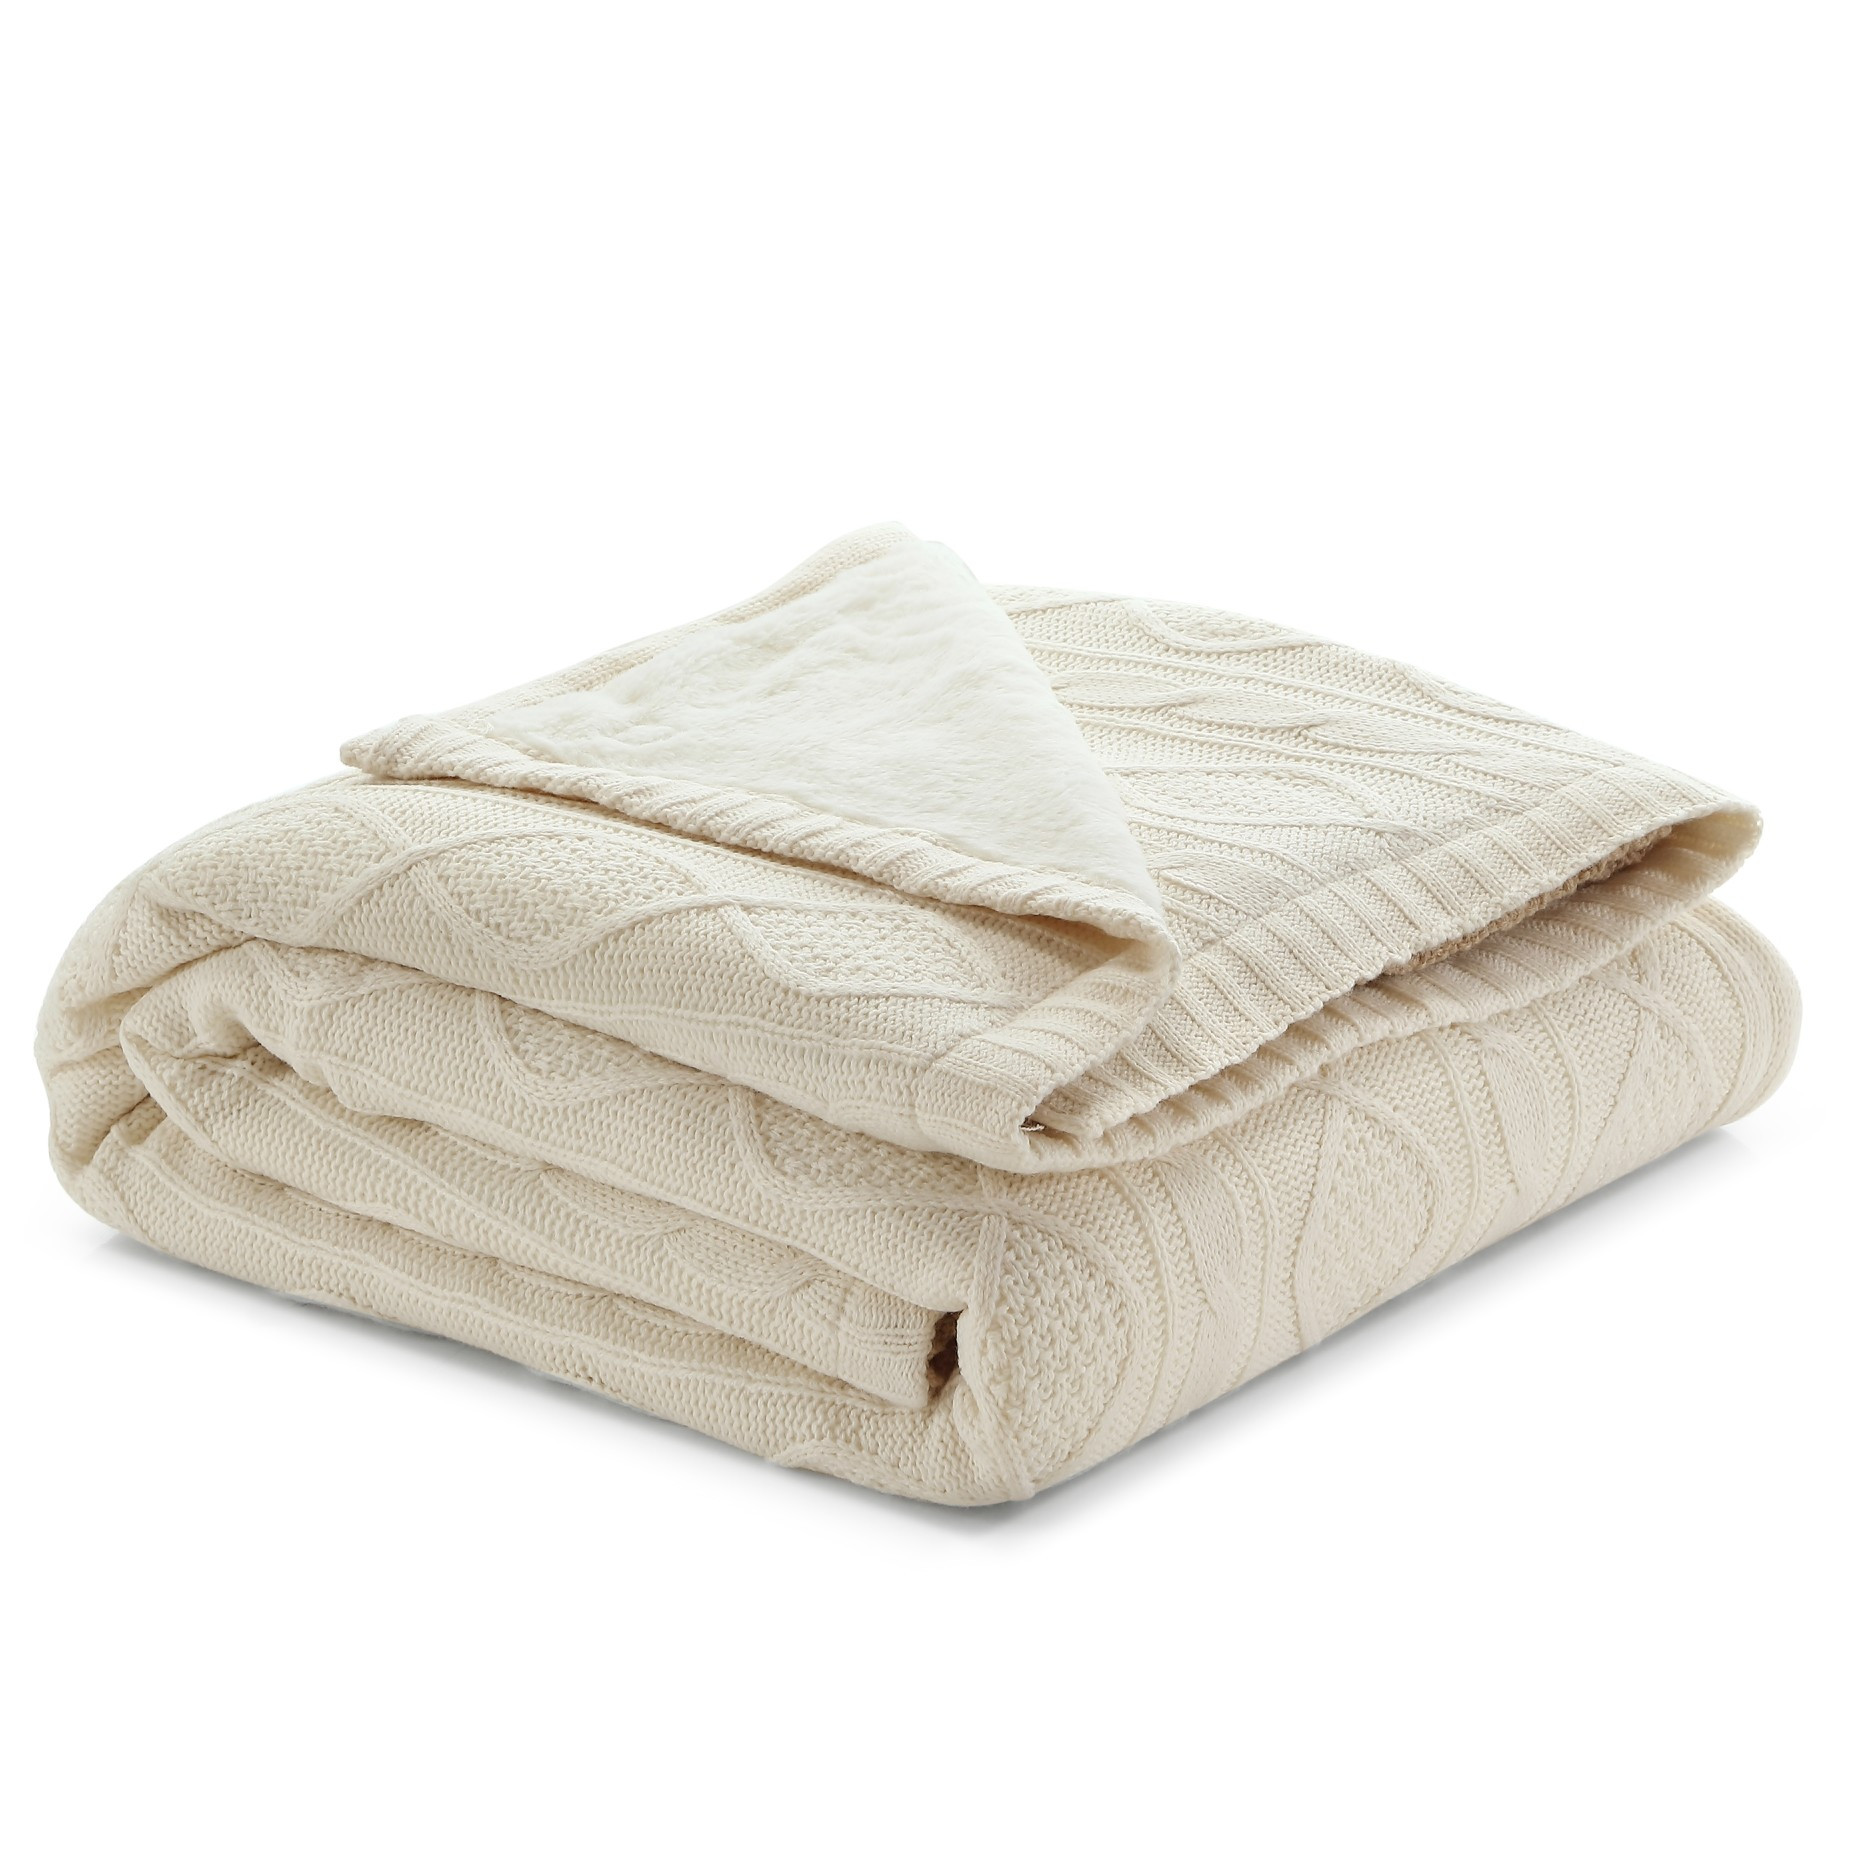 Cream Knitted Acrylic Solid Color Throw Blanket-531258-1